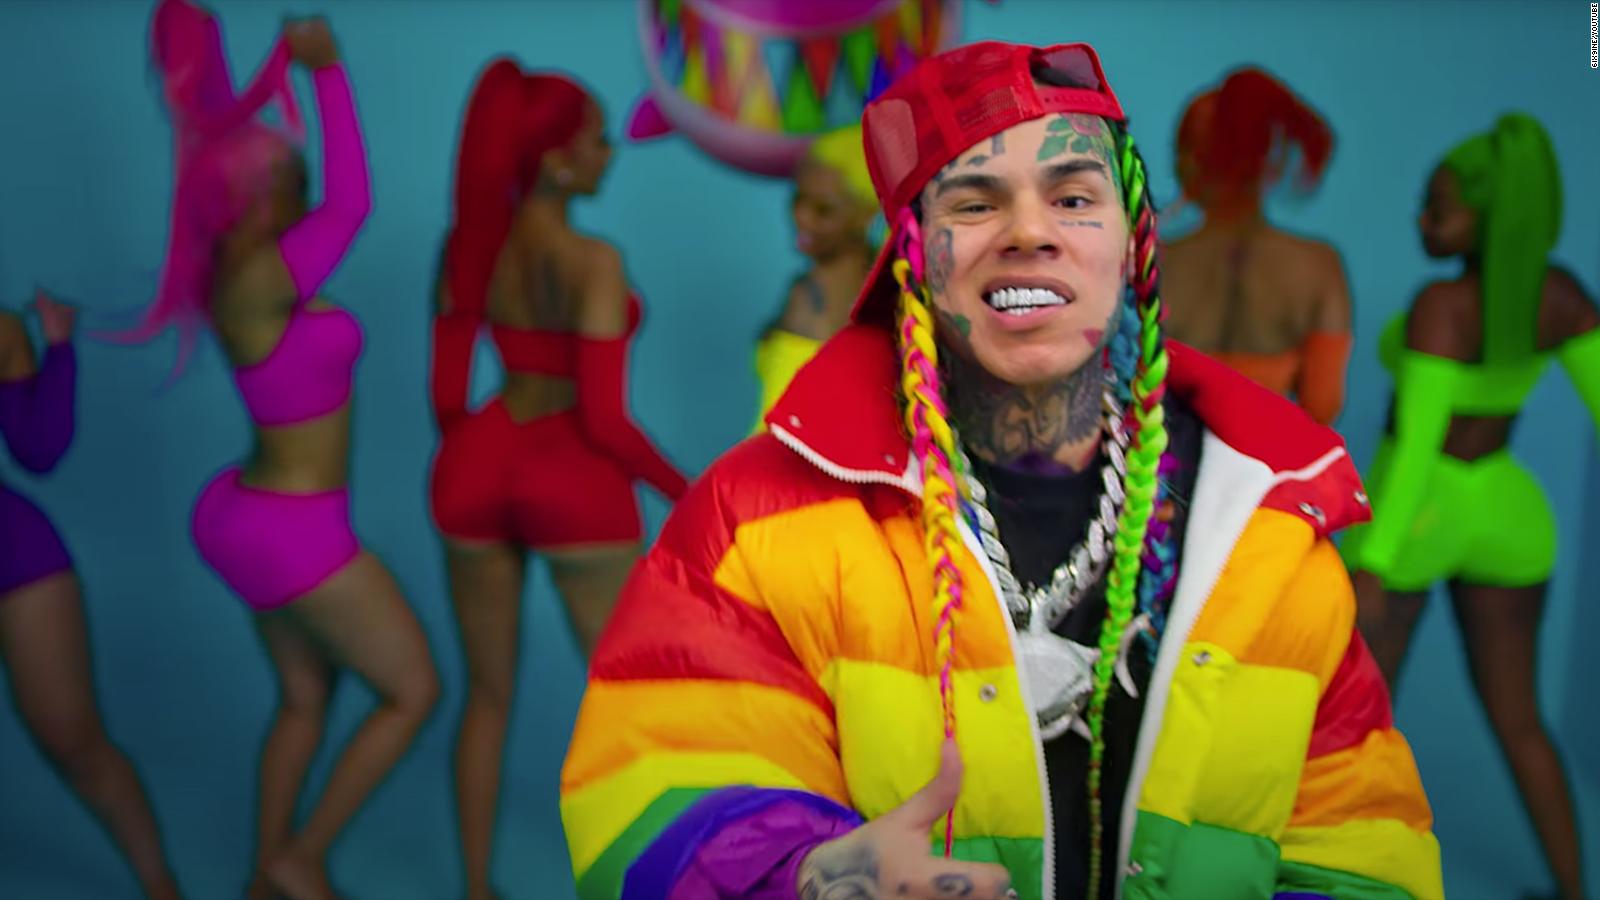 6ix9ine Releases Gooba His First New Song Since Returning Home From